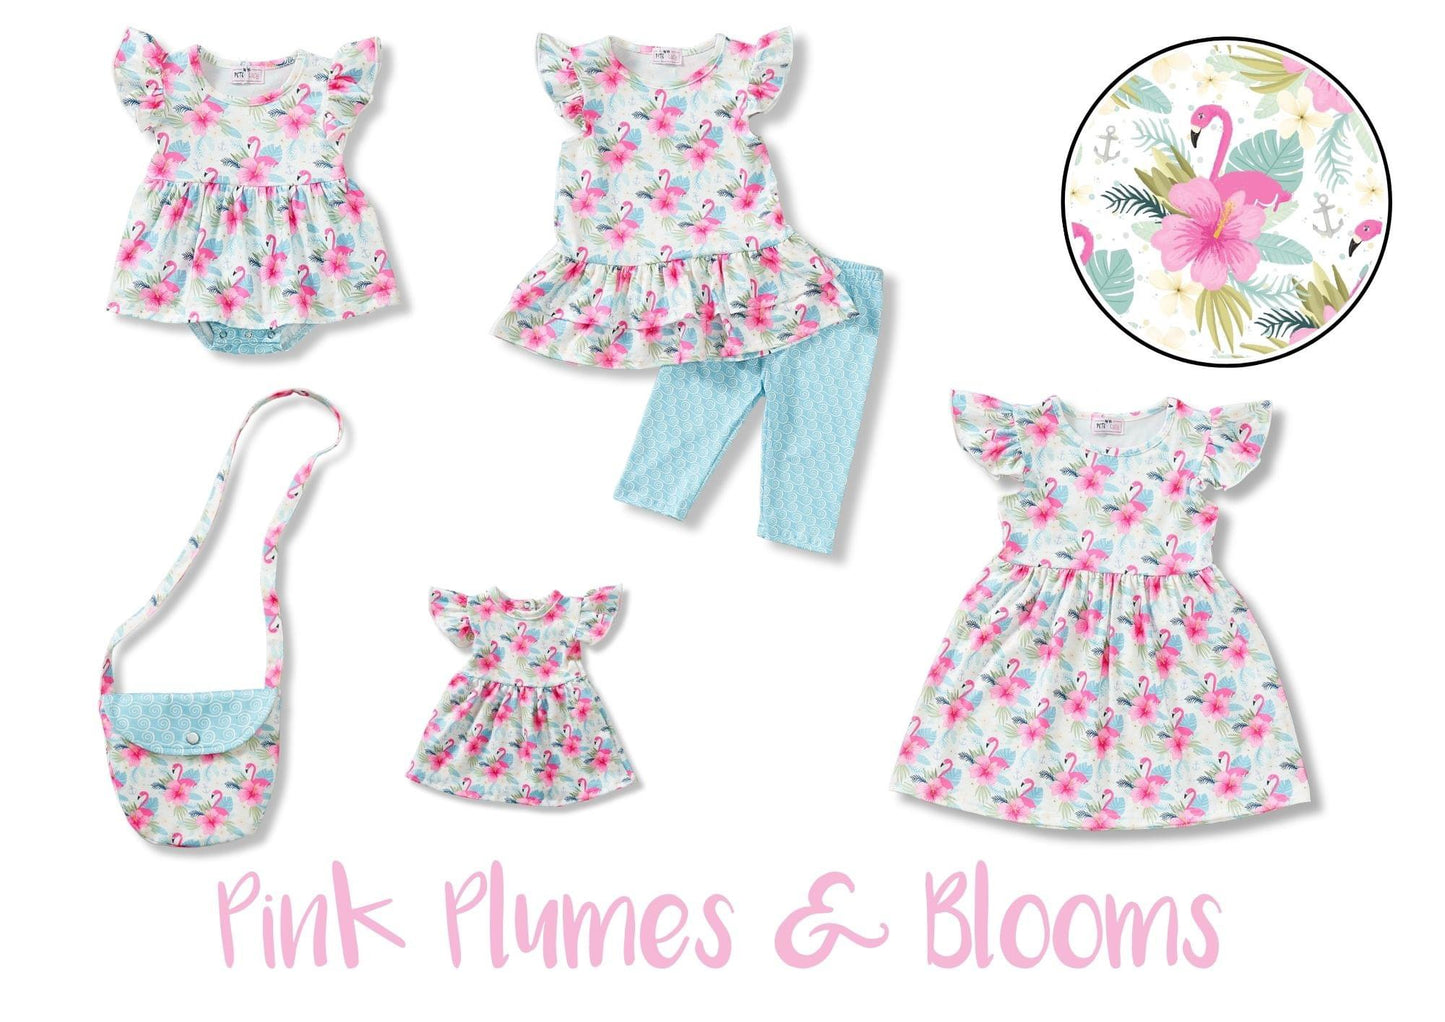 Pink Plumes & Blooms Dress by Pete + Lucy